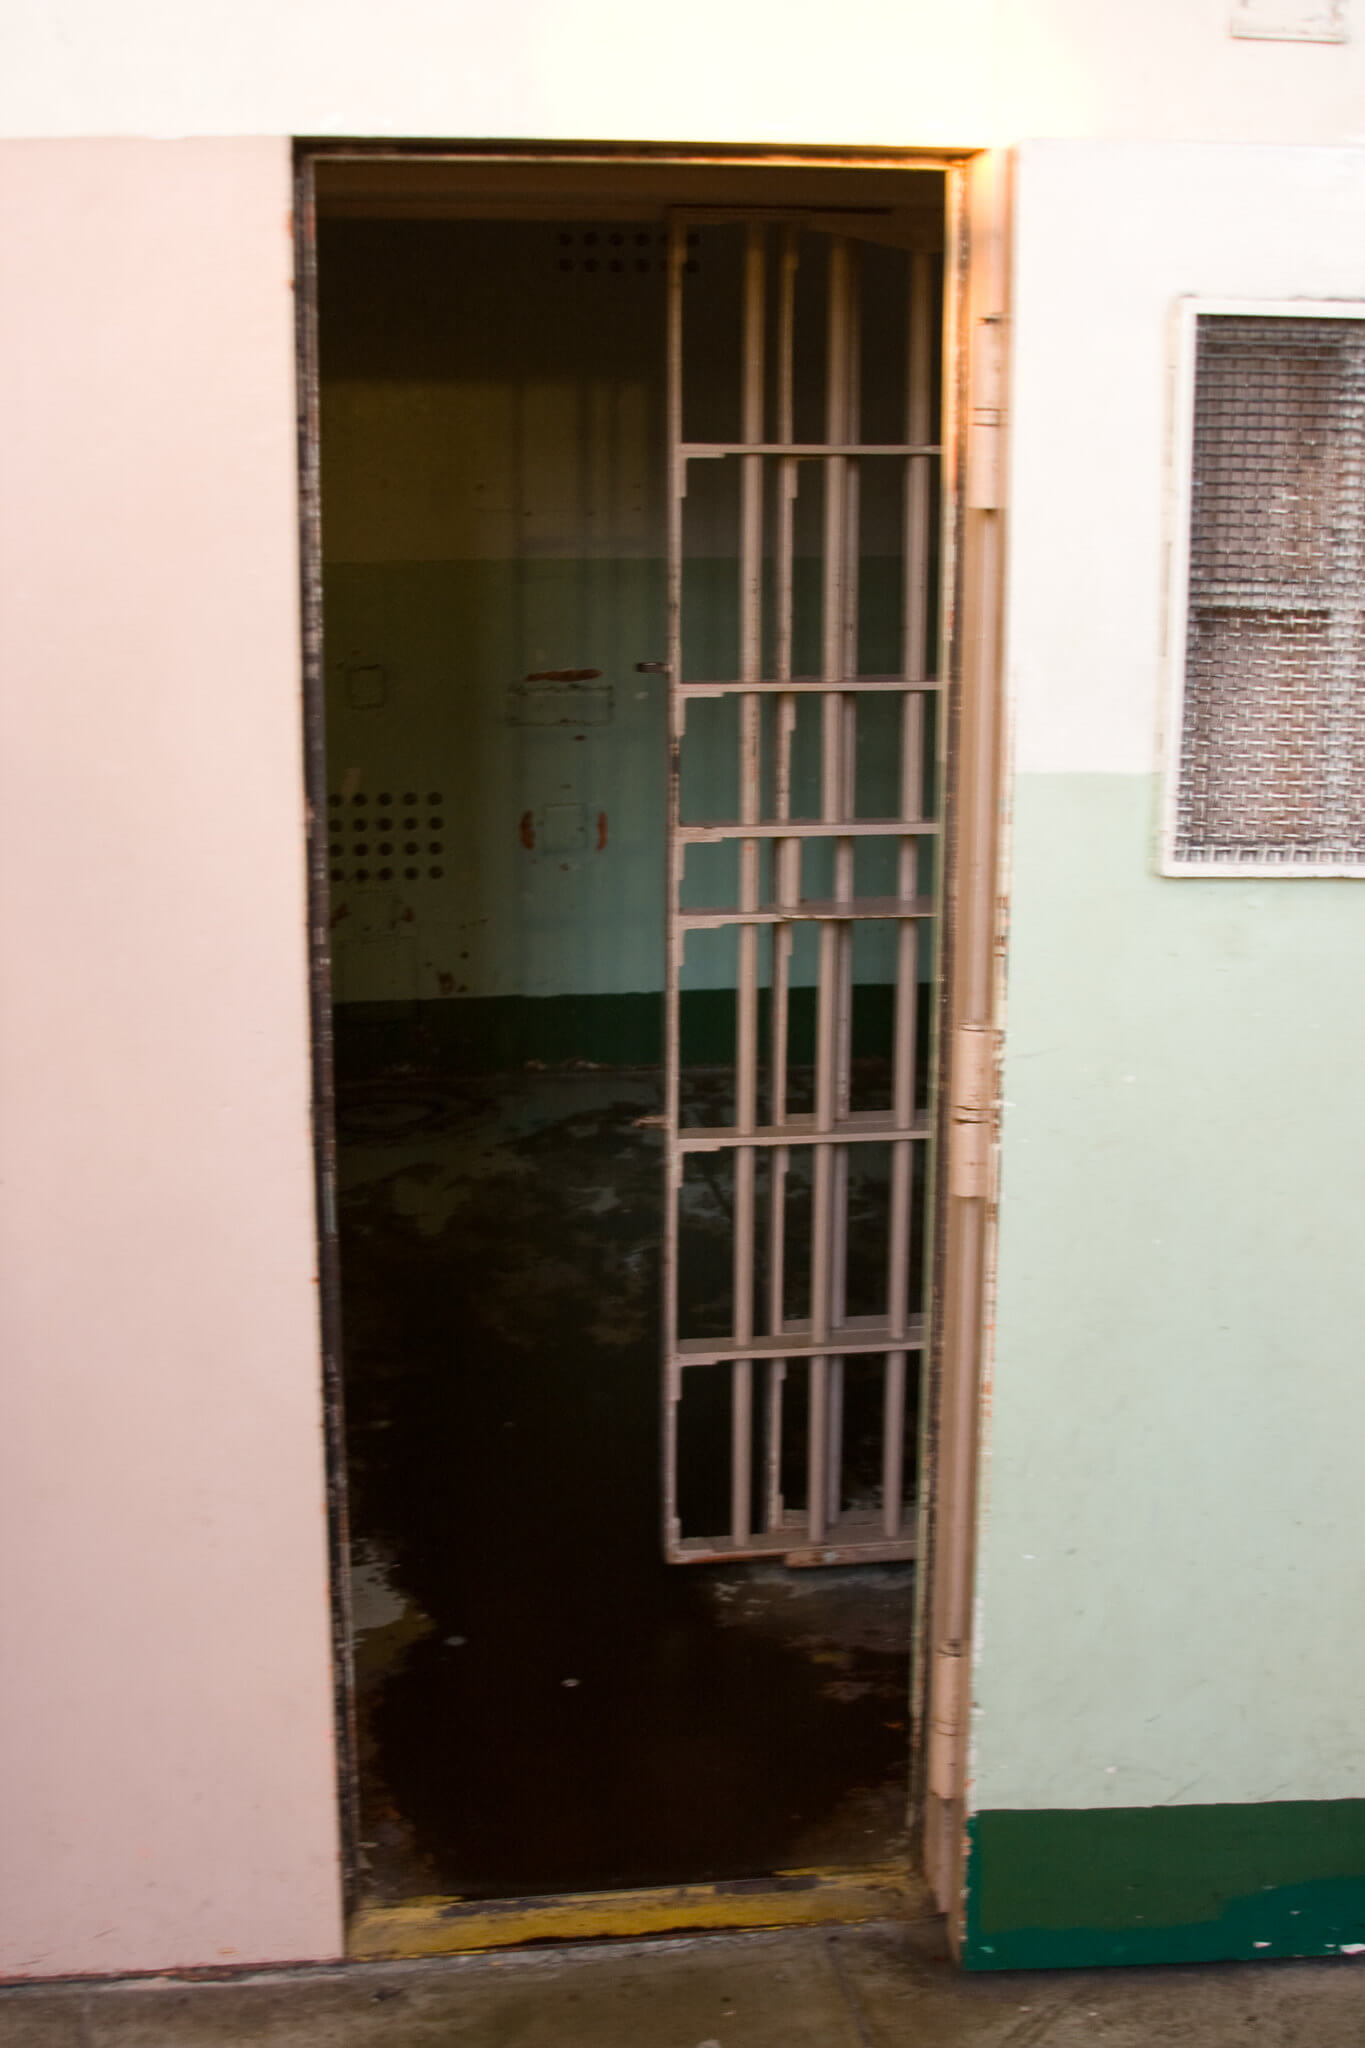 Solitary Confinement Cell | Author: Chris Richards | License: CC BY-NC-ND 2.0